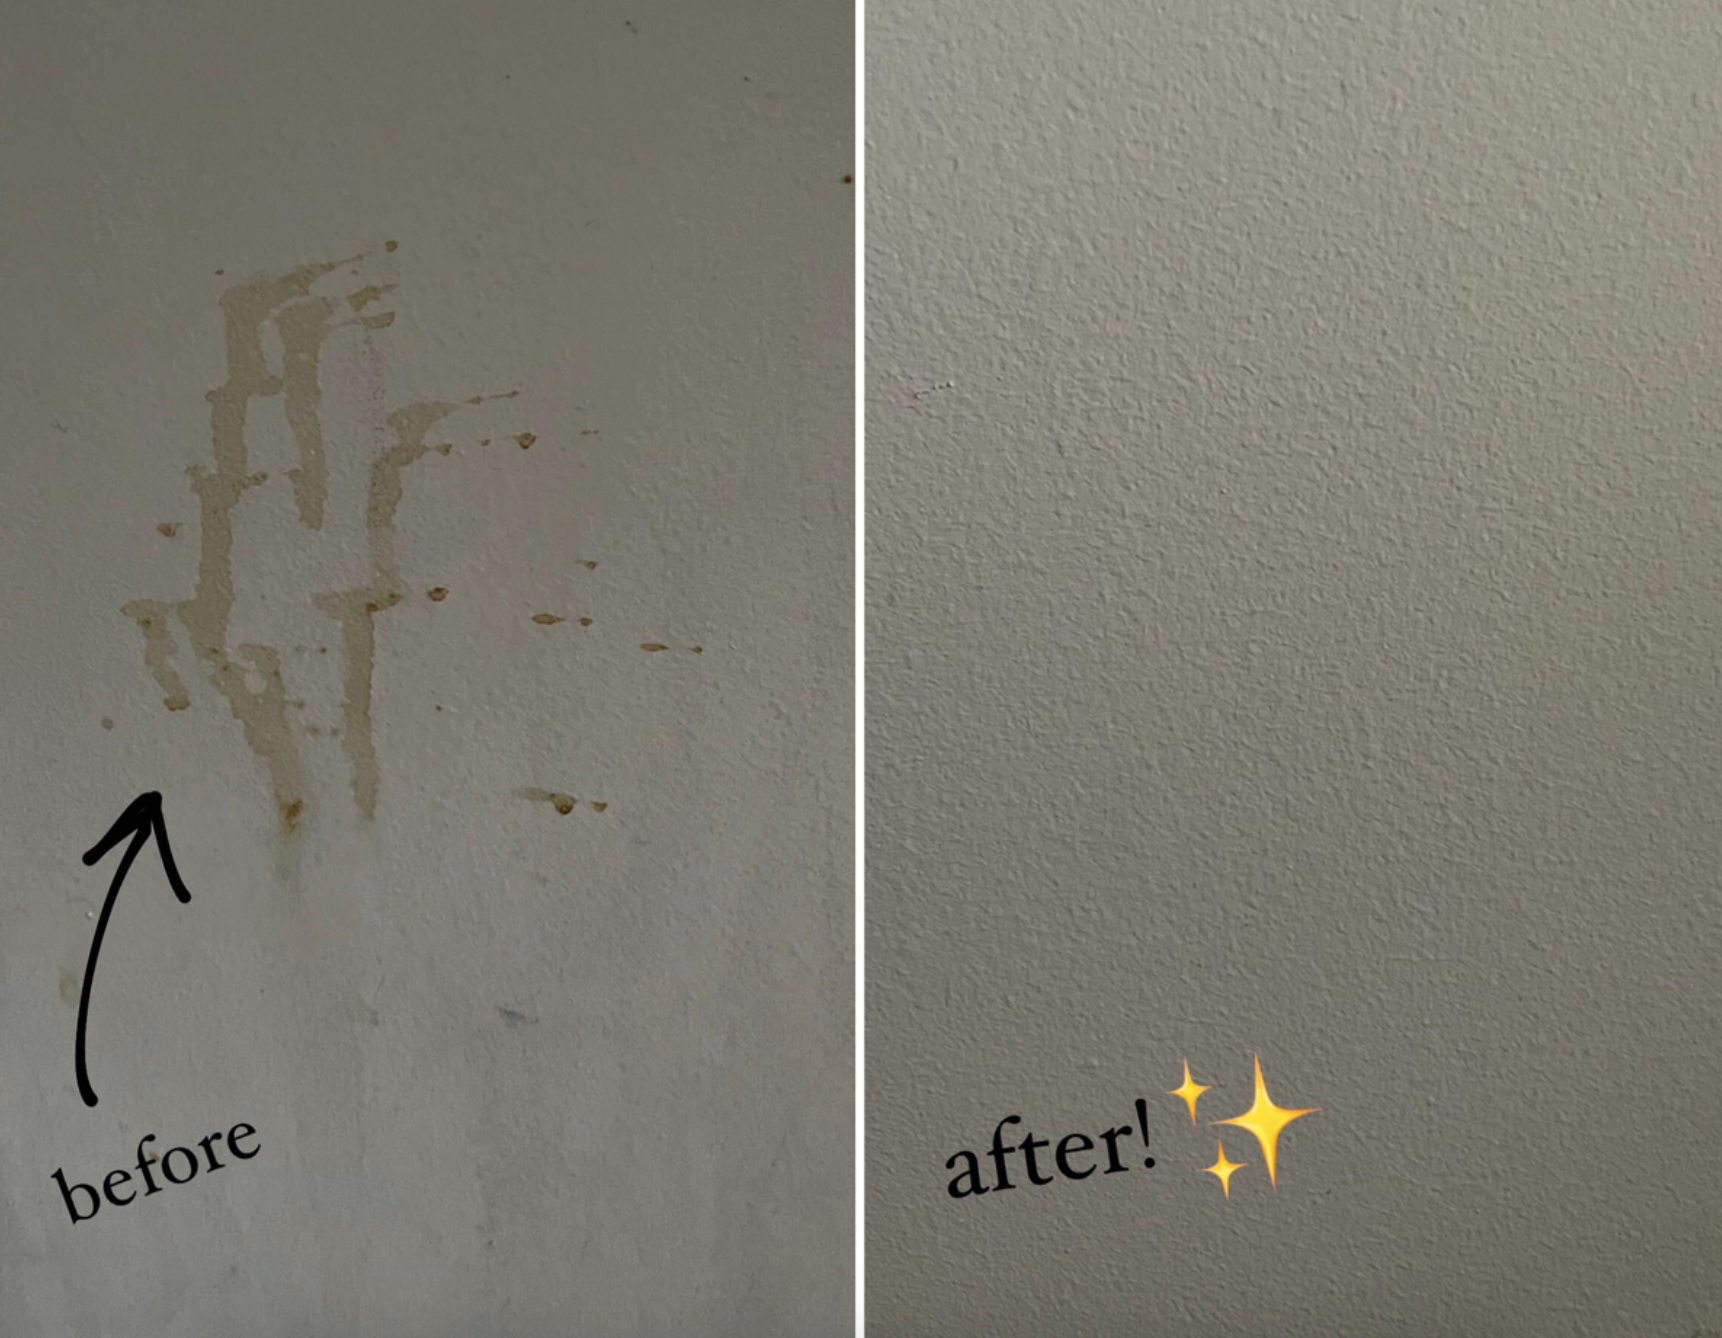 on left: before photo of brown stain on wall. on right: after photo of same wall with no stain after using the multipurpose spray above